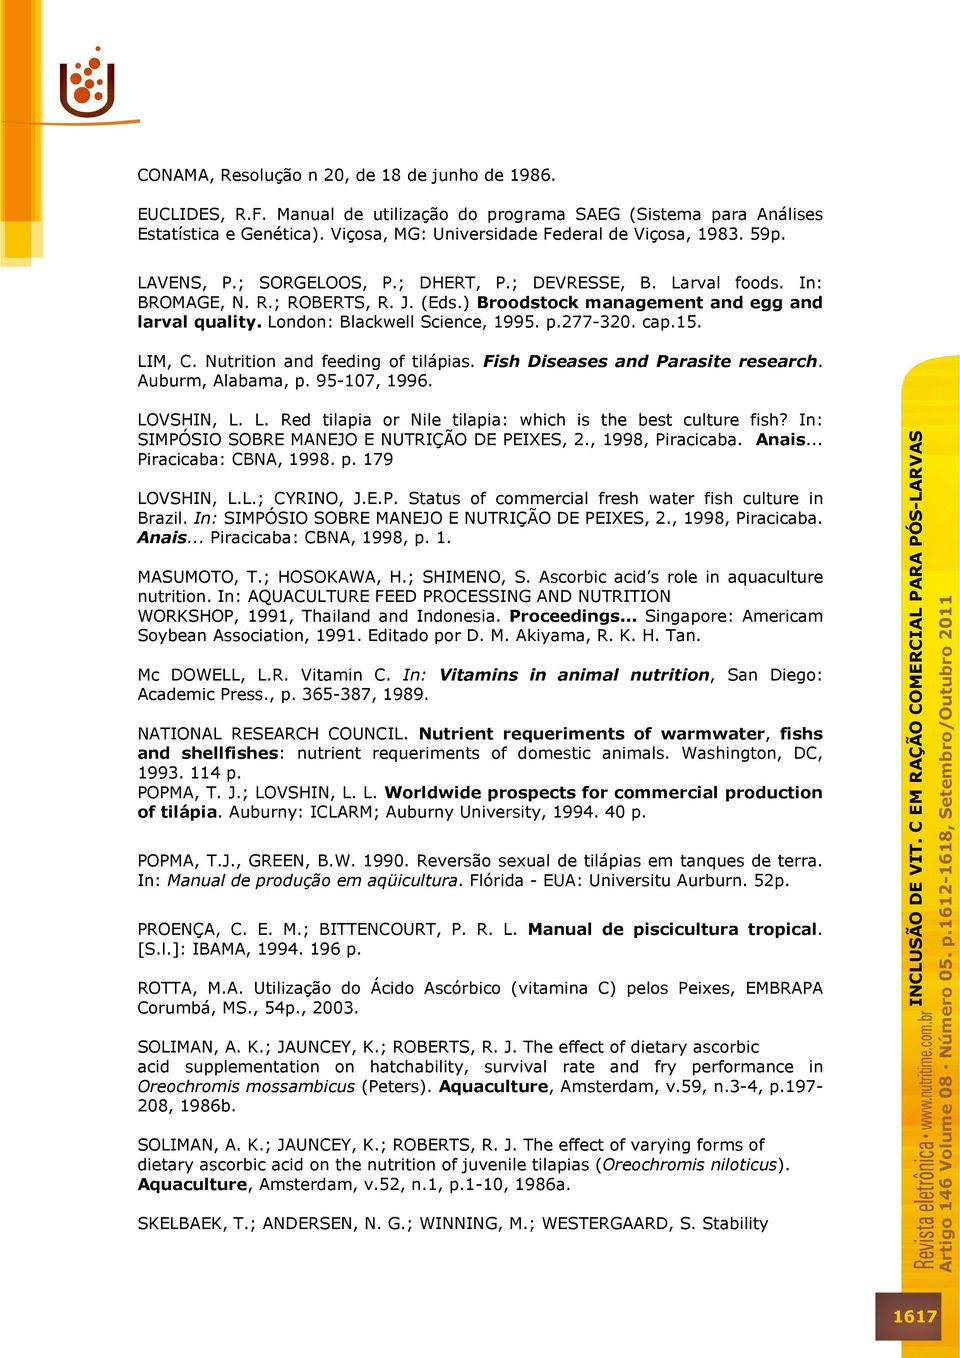 277-320. cap.15. LIM, C. Nutrition and feeding of tilápias. Fish Diseases and Parasite research. Auburm, Alabama, p. 95-107, 1996. LOVSHIN, L. L. Red tilapia or Nile tilapia: which is the best culture fish?